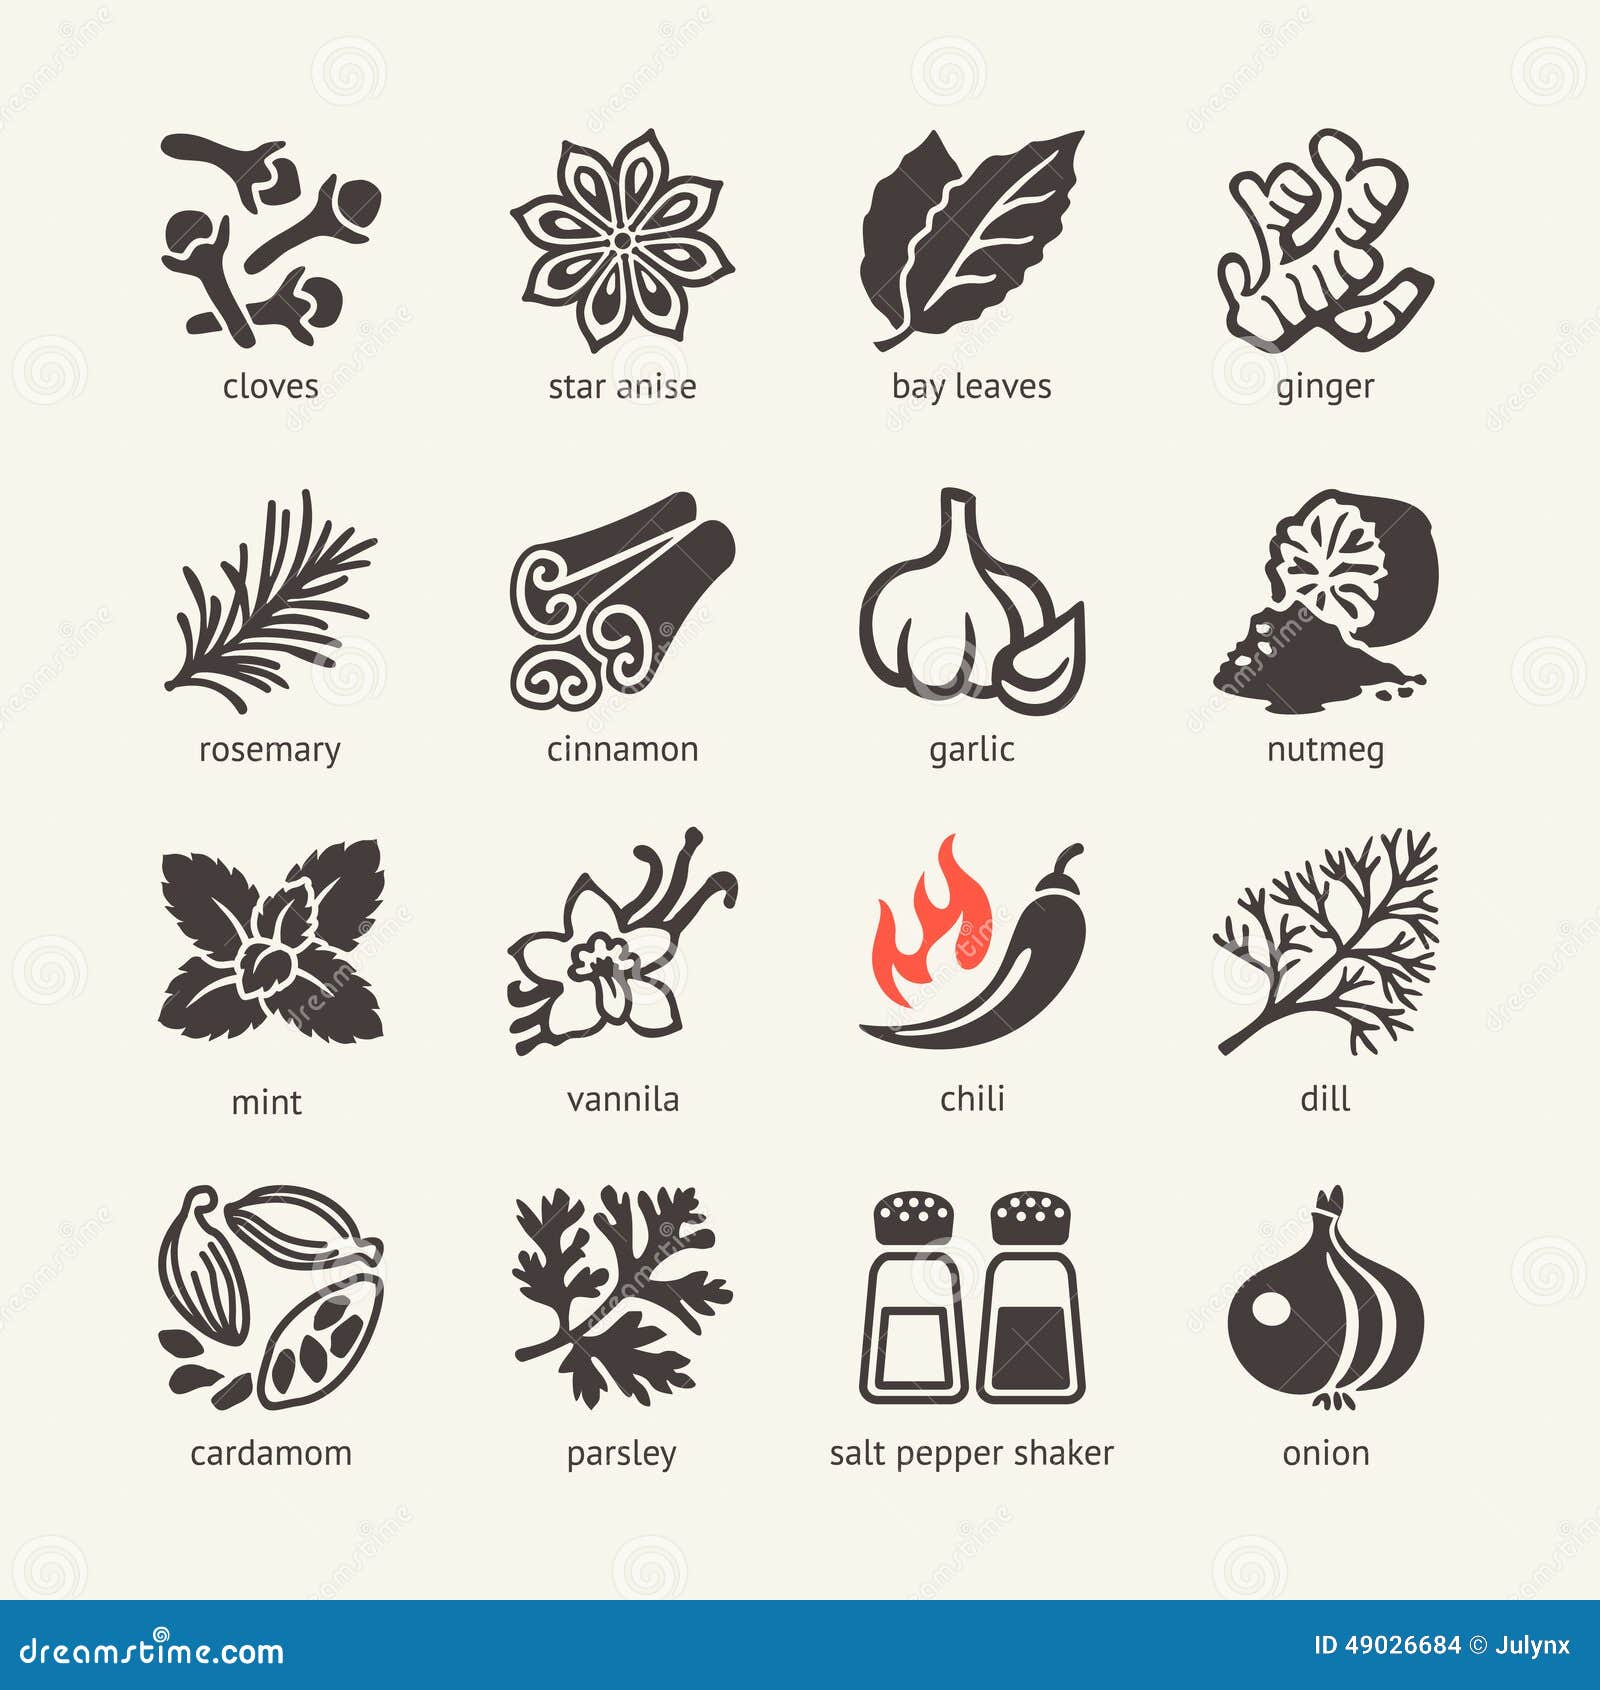 web icon set - spices, condiments and herbs